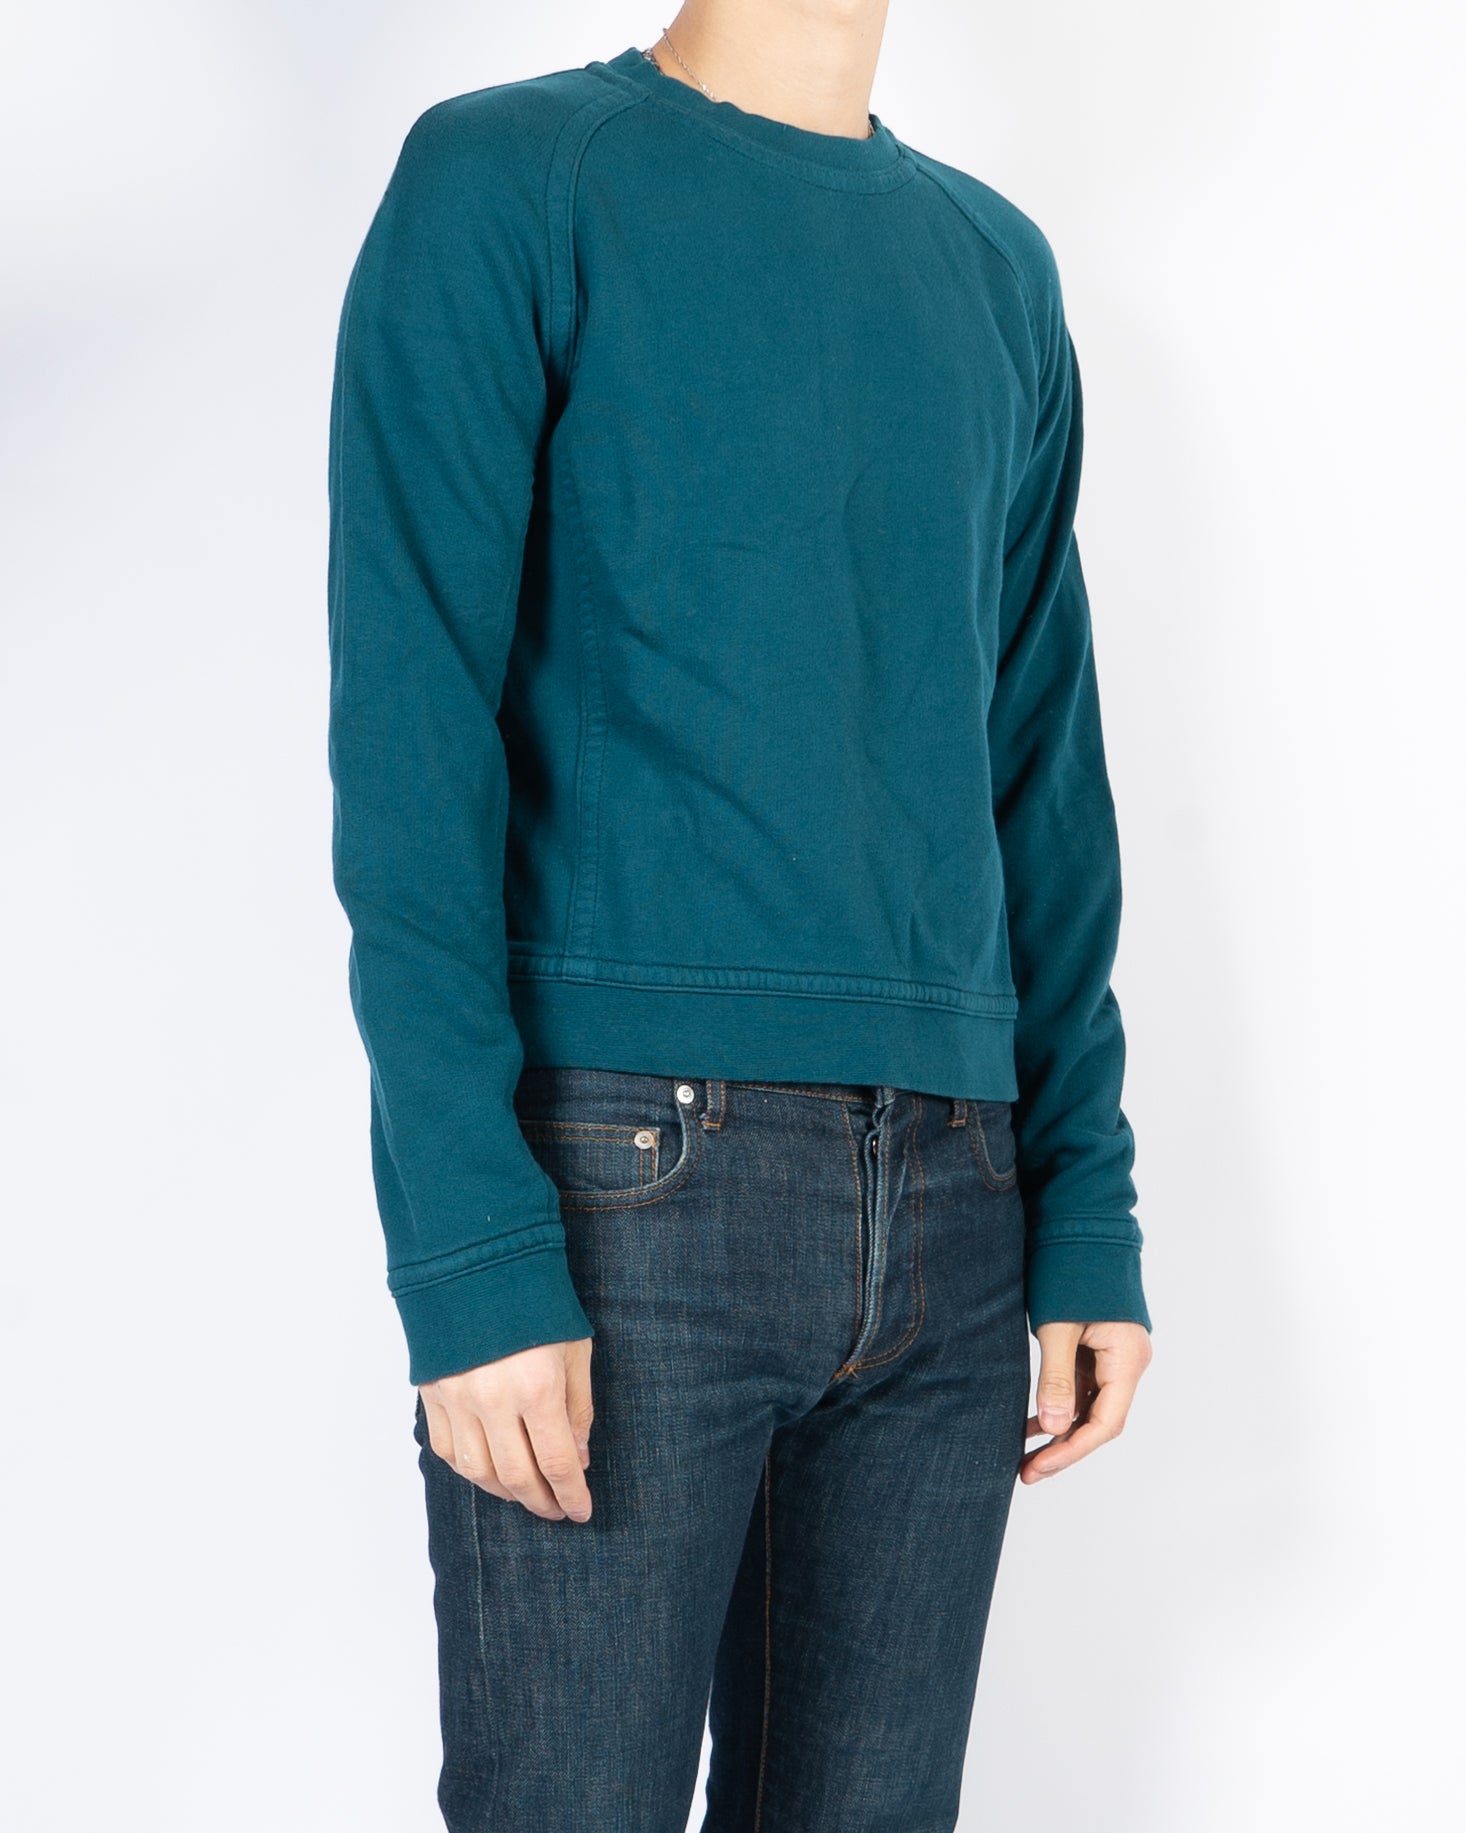 FW17 Turquoise Perth Sweater